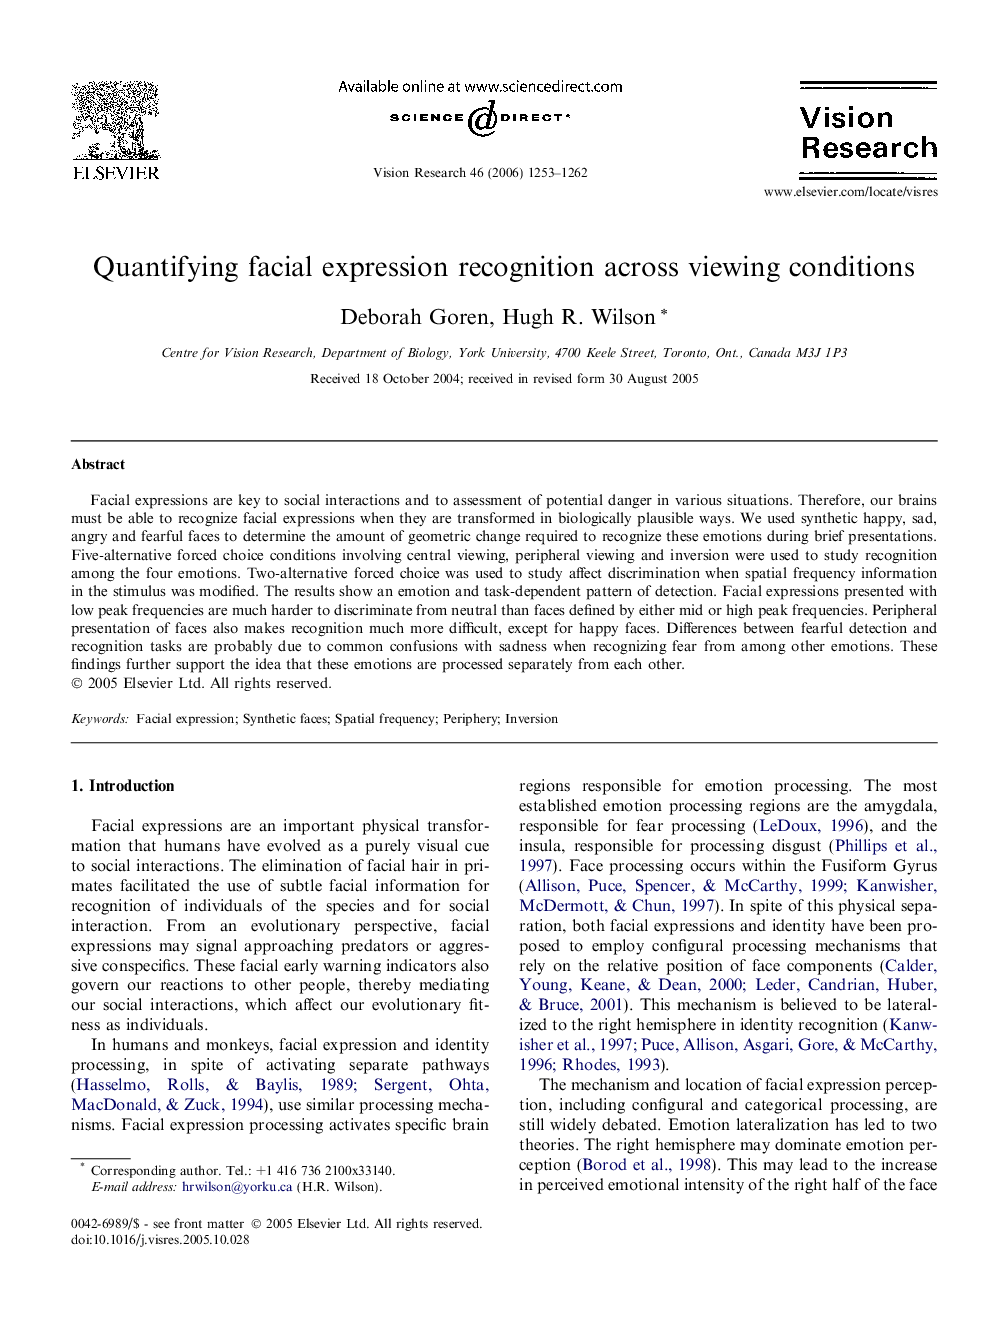 Quantifying facial expression recognition across viewing conditions